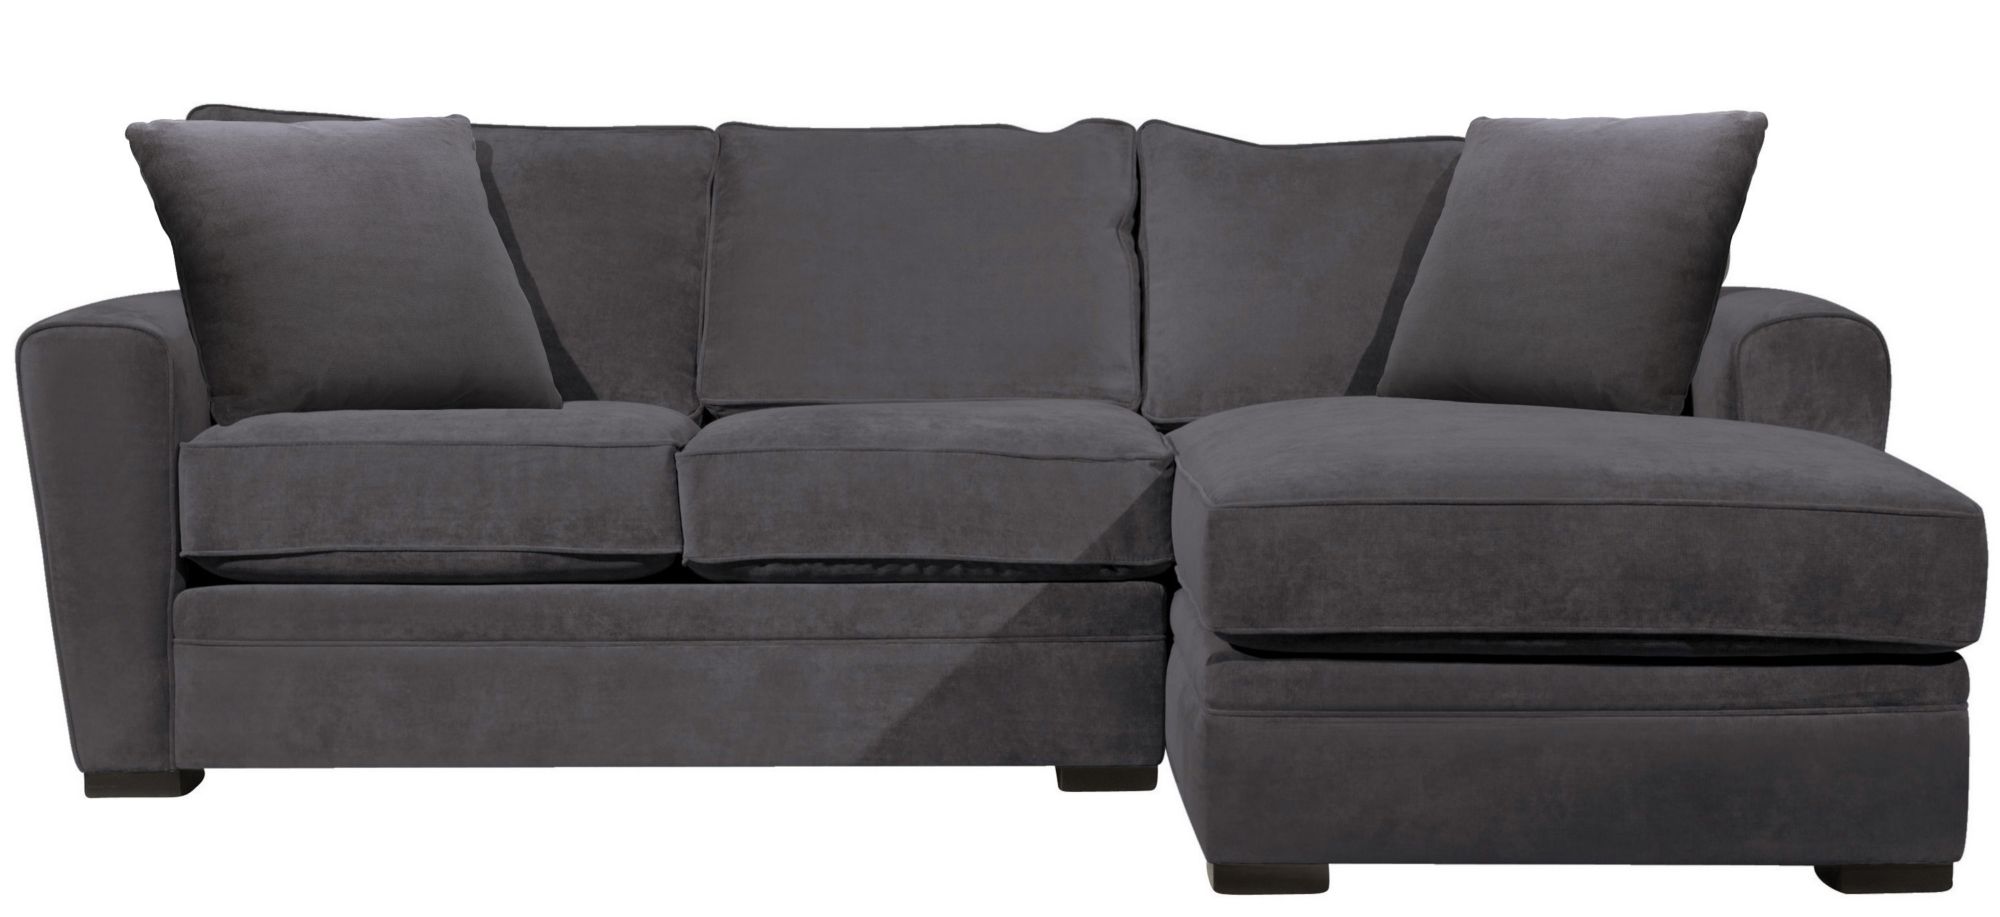 Artemis II 2-pc. Full Sleeper Right Hand Facing Sectional Sofa in Gypsy Graphite by Jonathan Louis